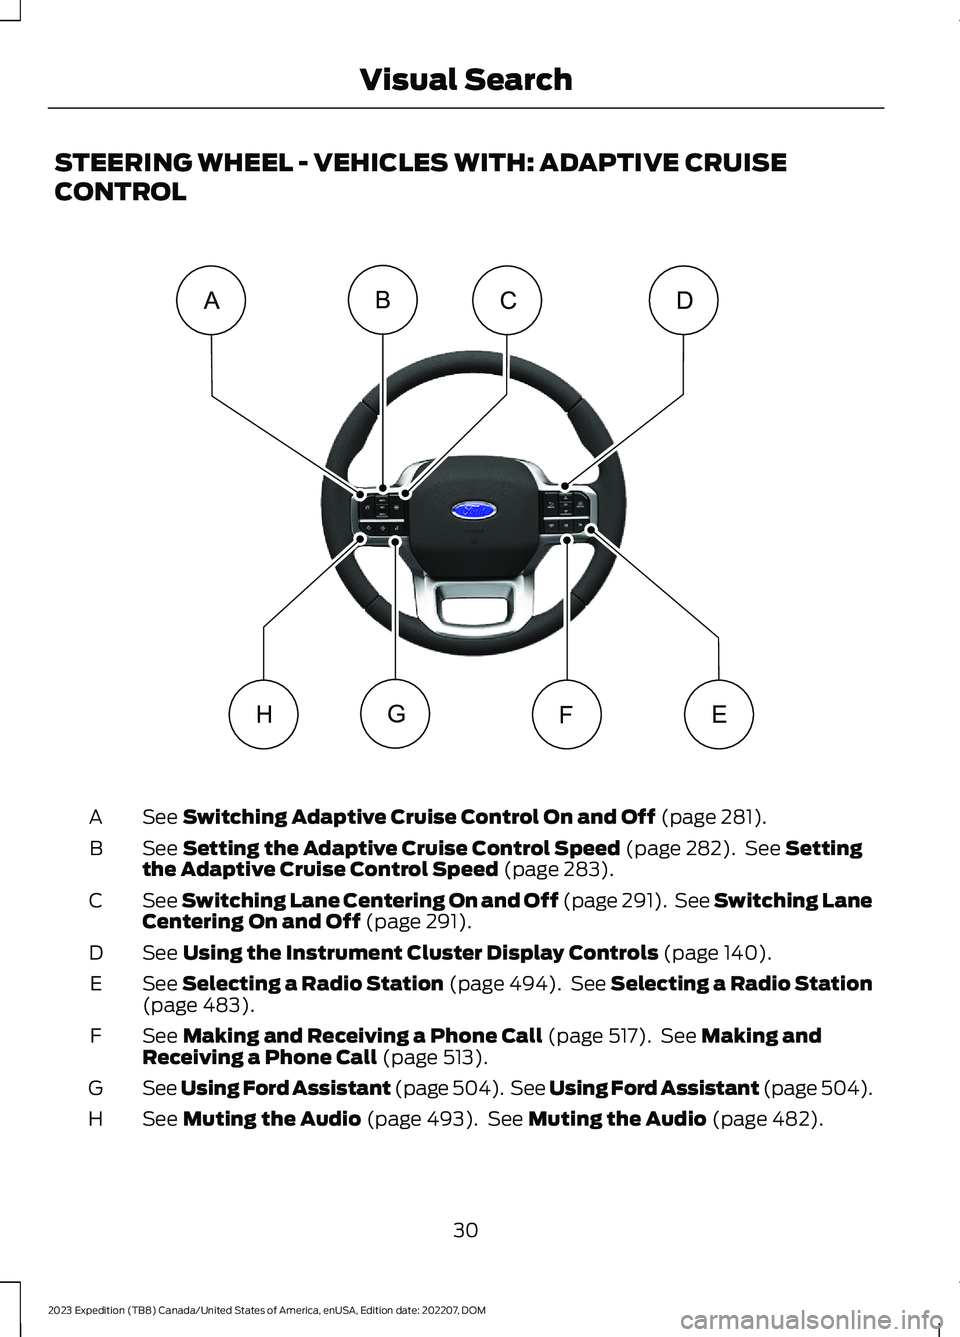 FORD EXPEDITION 2023  Owners Manual STEERING WHEEL - VEHICLES WITH: ADAPTIVE CRUISE
CONTROL
See Switching Adaptive Cruise Control On and Off (page 281).A
See Setting the Adaptive Cruise Control Speed (page 282). See Settingthe Adaptive 